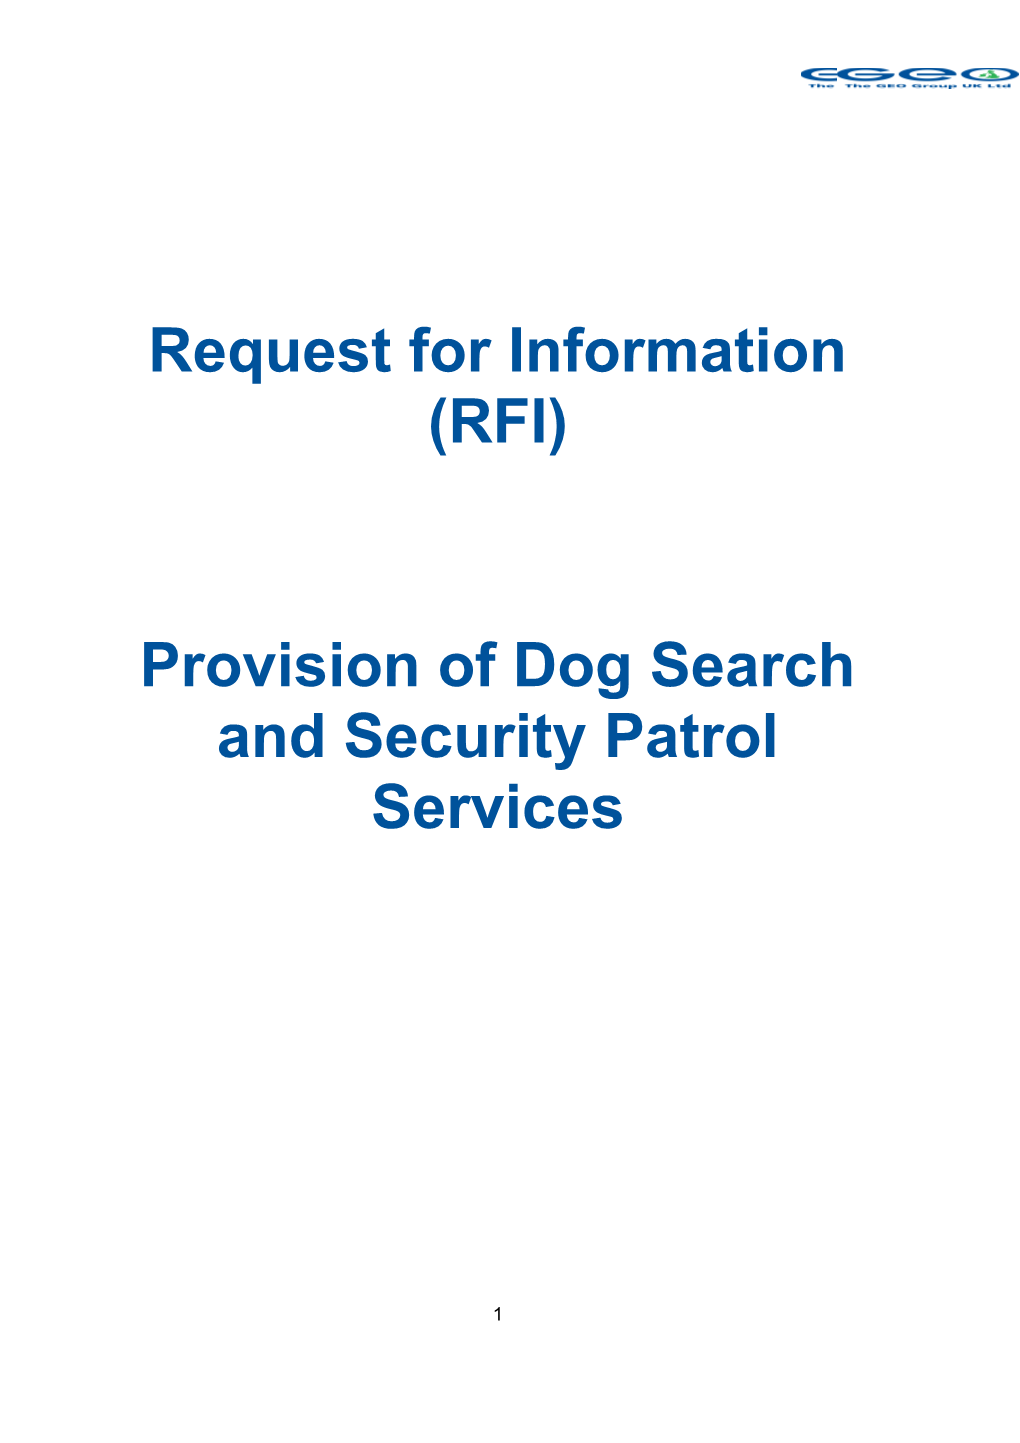 Provision of Dog Search and Security Patrol Services